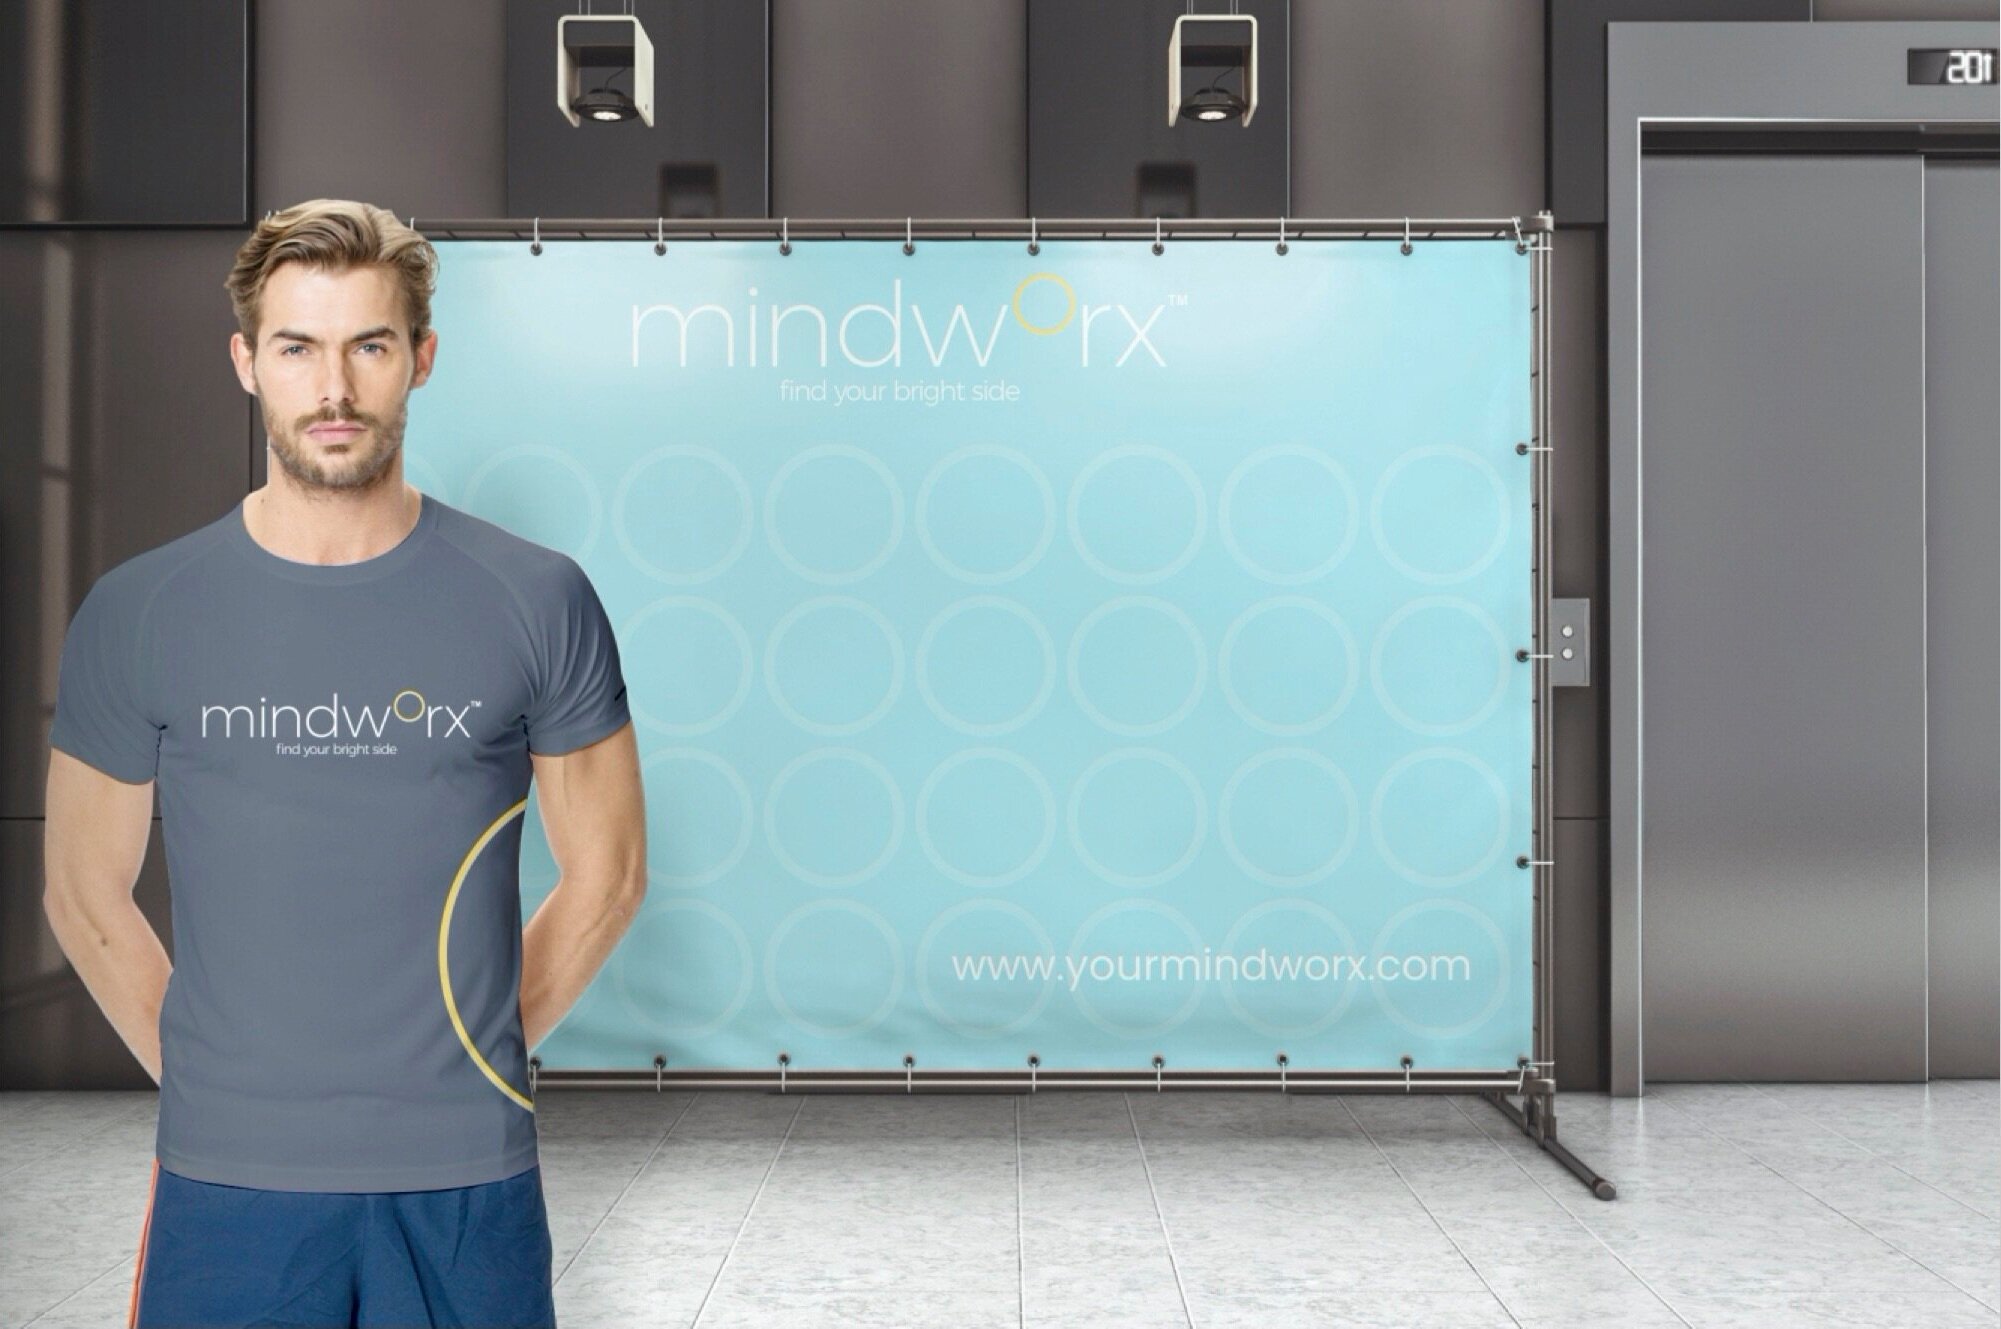 MINDWORX+-+STEP+AND+REPEAT+BANNER.jpg